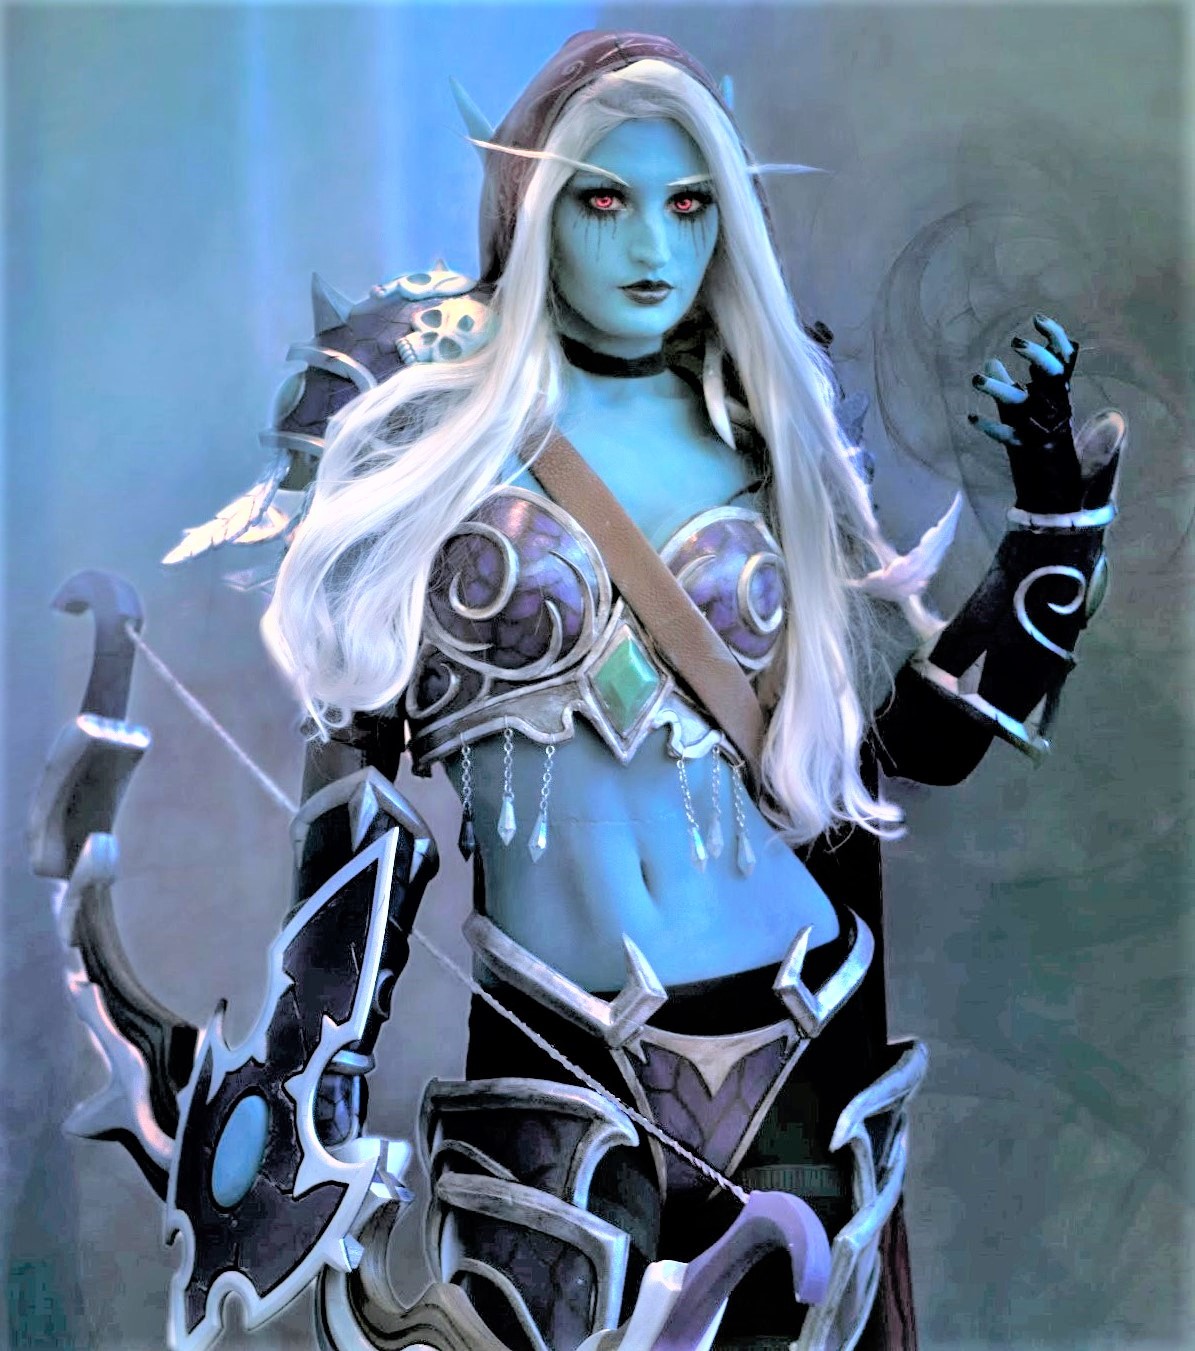 Courtesy. A Tampa-based cosplayer in costume as Sylvanas Windrunner, a character from Blizzard Entertainment's 